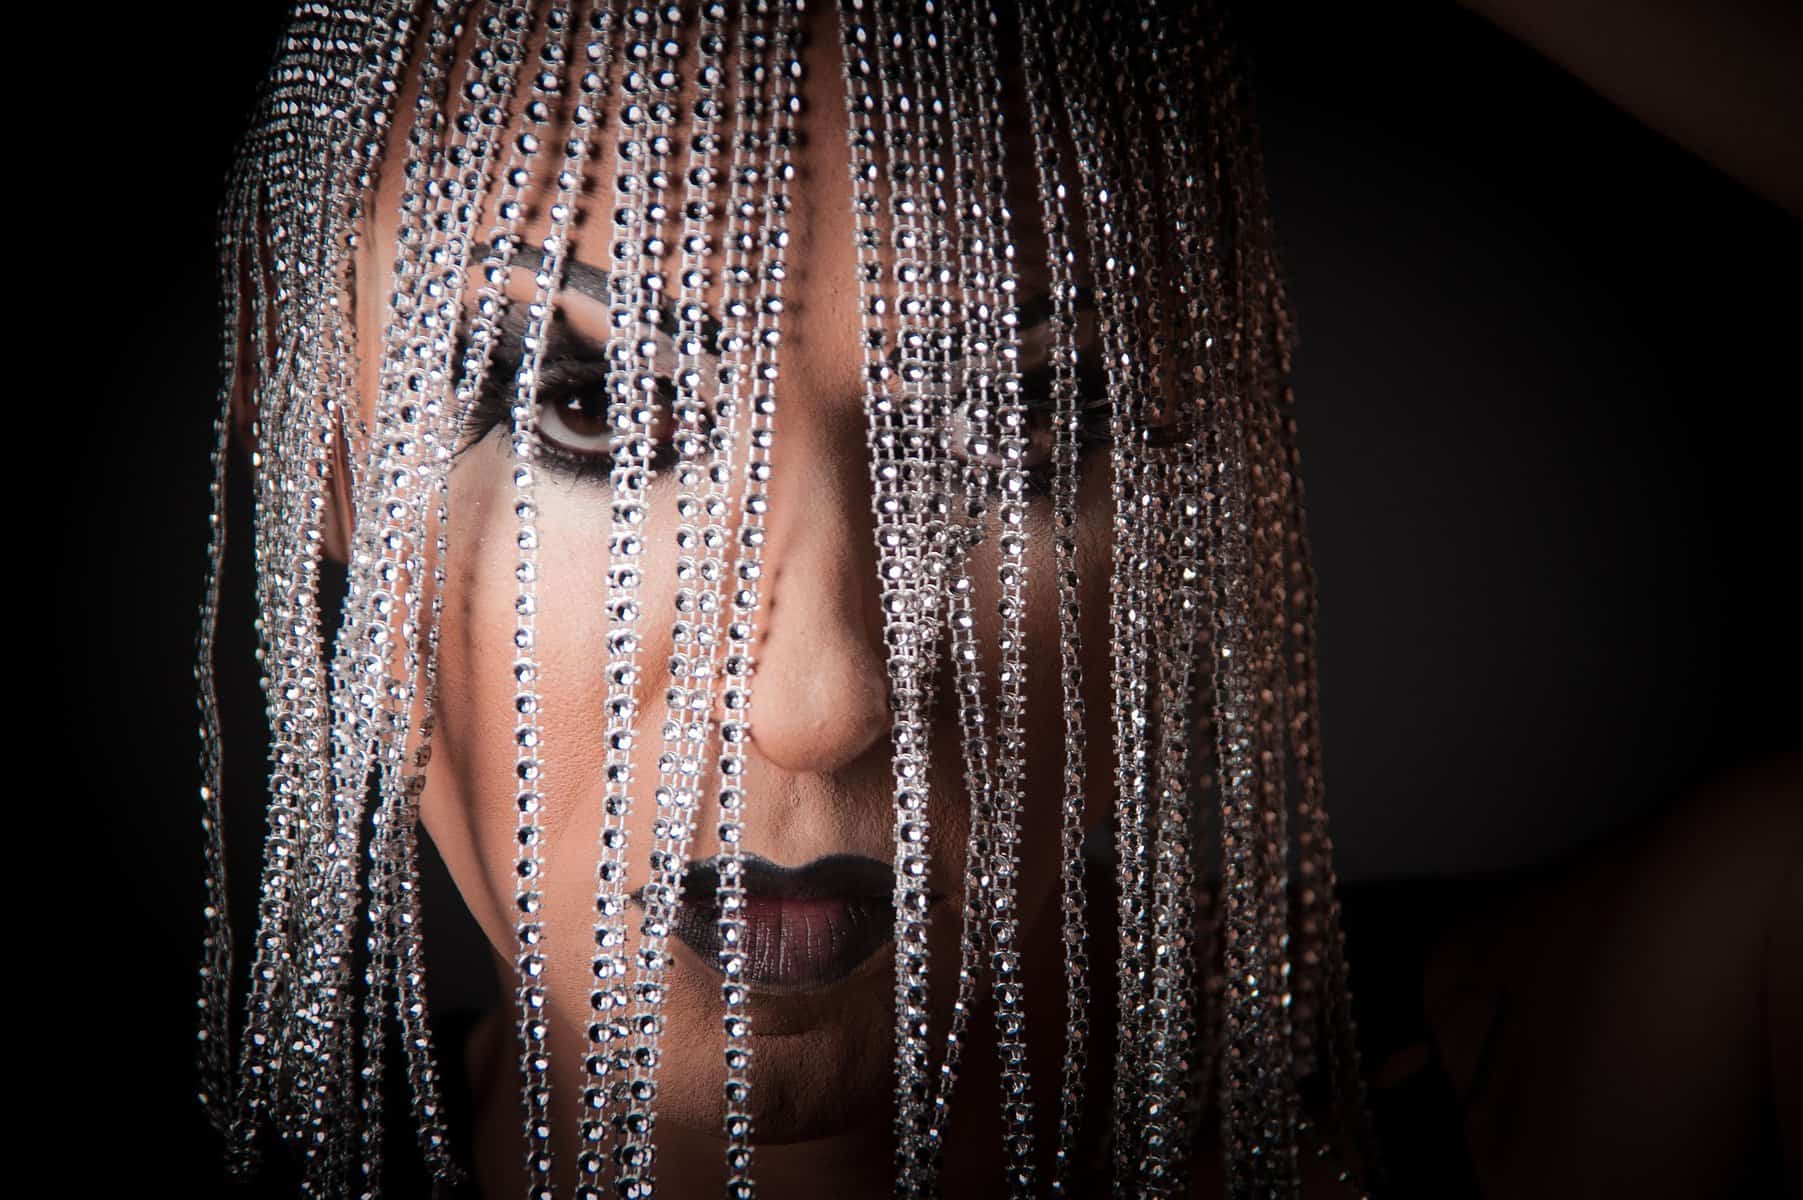 The face of a drag queen in shown close up with silver, tiny braids hanging in from of the face.